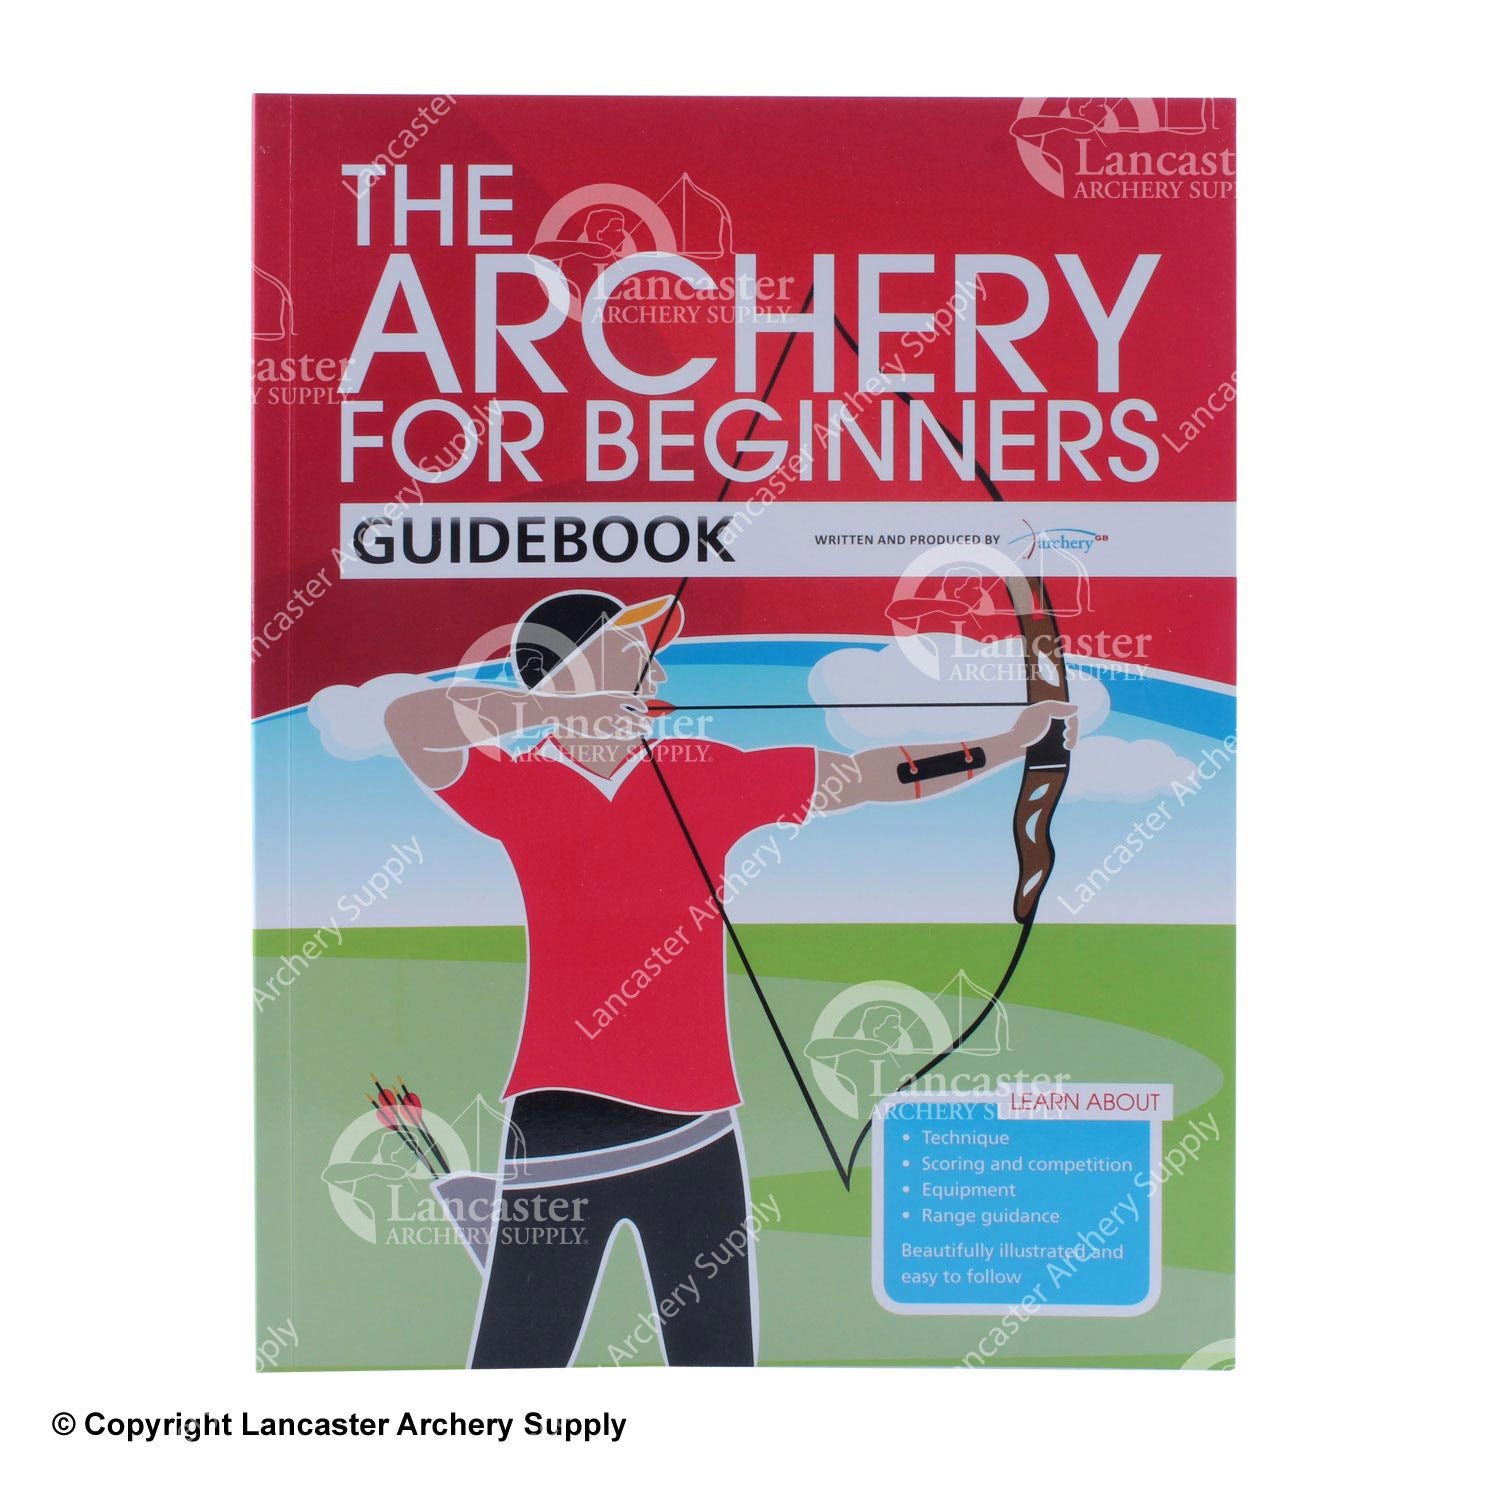 The Archery for Beginners Guidebook